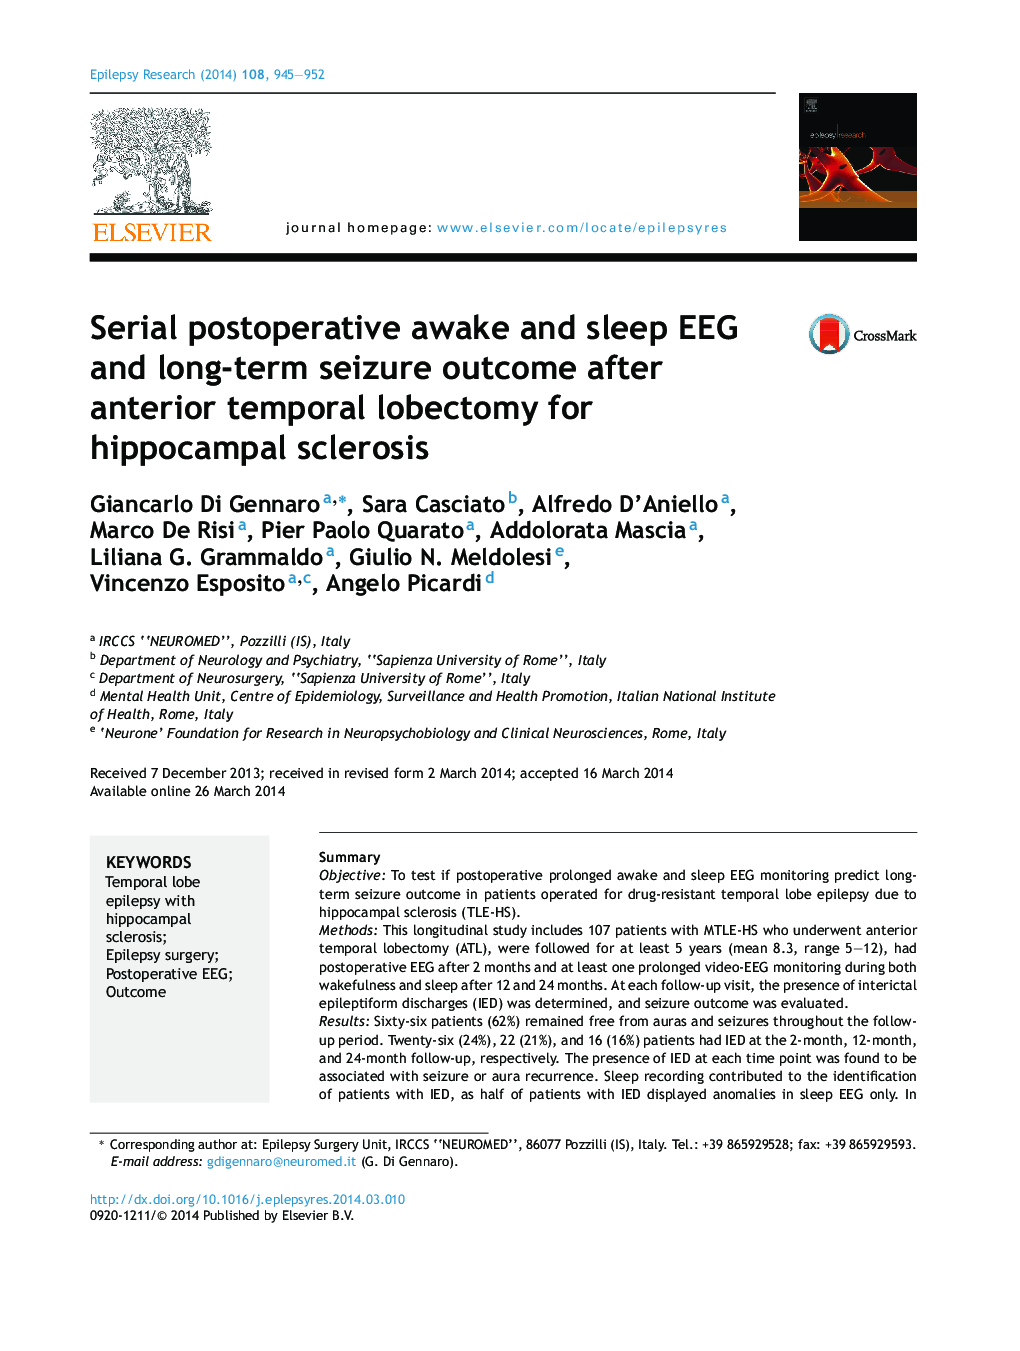 Serial postoperative awake and sleep EEG and long-term seizure outcome after anterior temporal lobectomy for hippocampal sclerosis